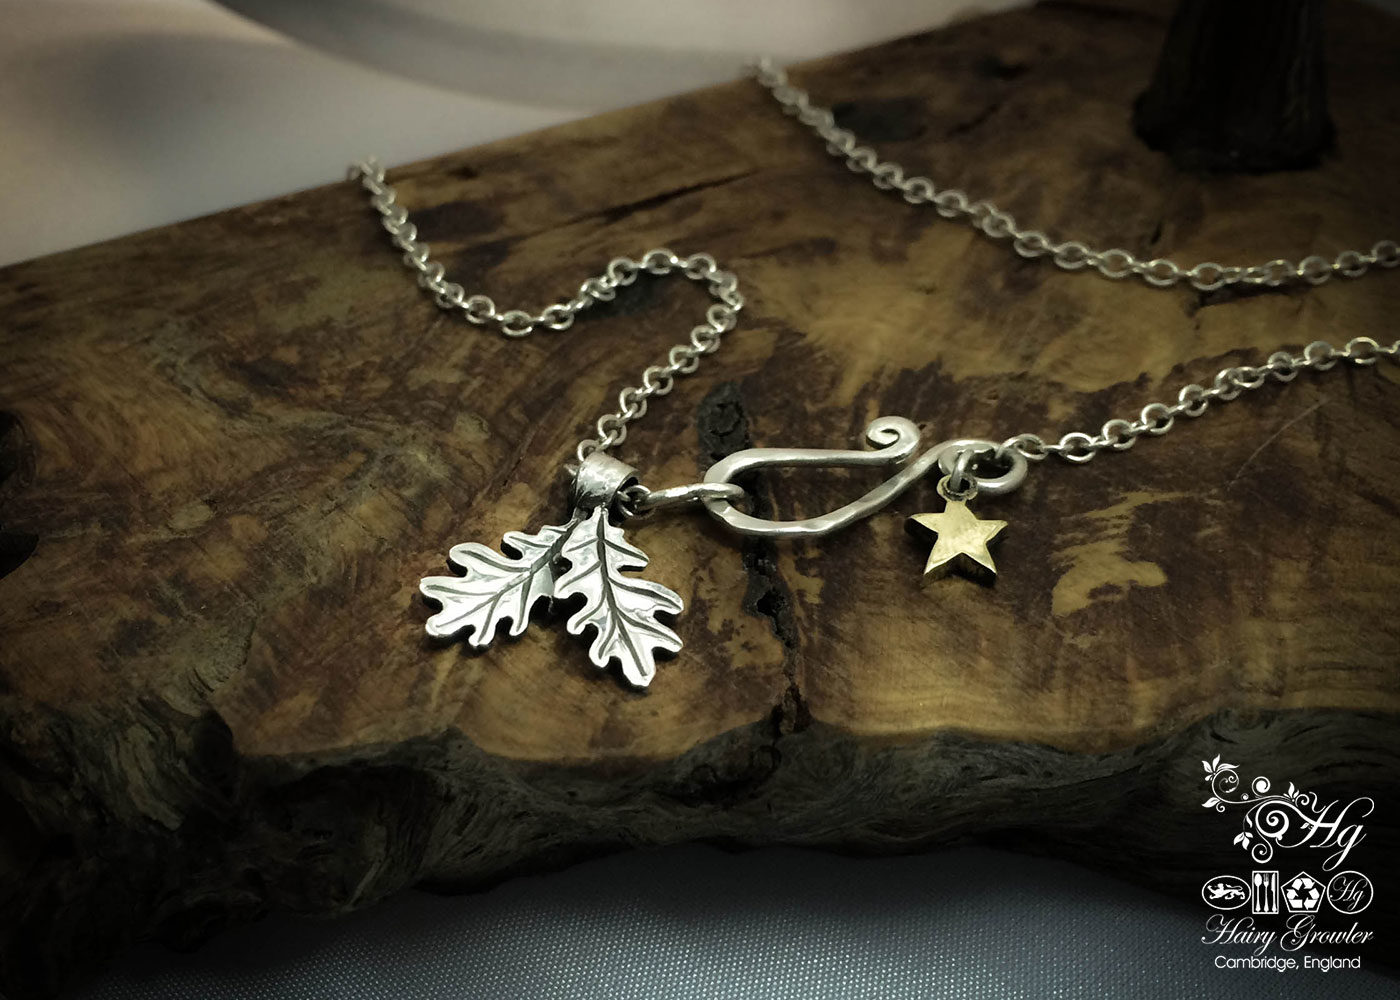 handcrafted silver pair of oak leaves charm for a tree sculpture, necklace or bracelet